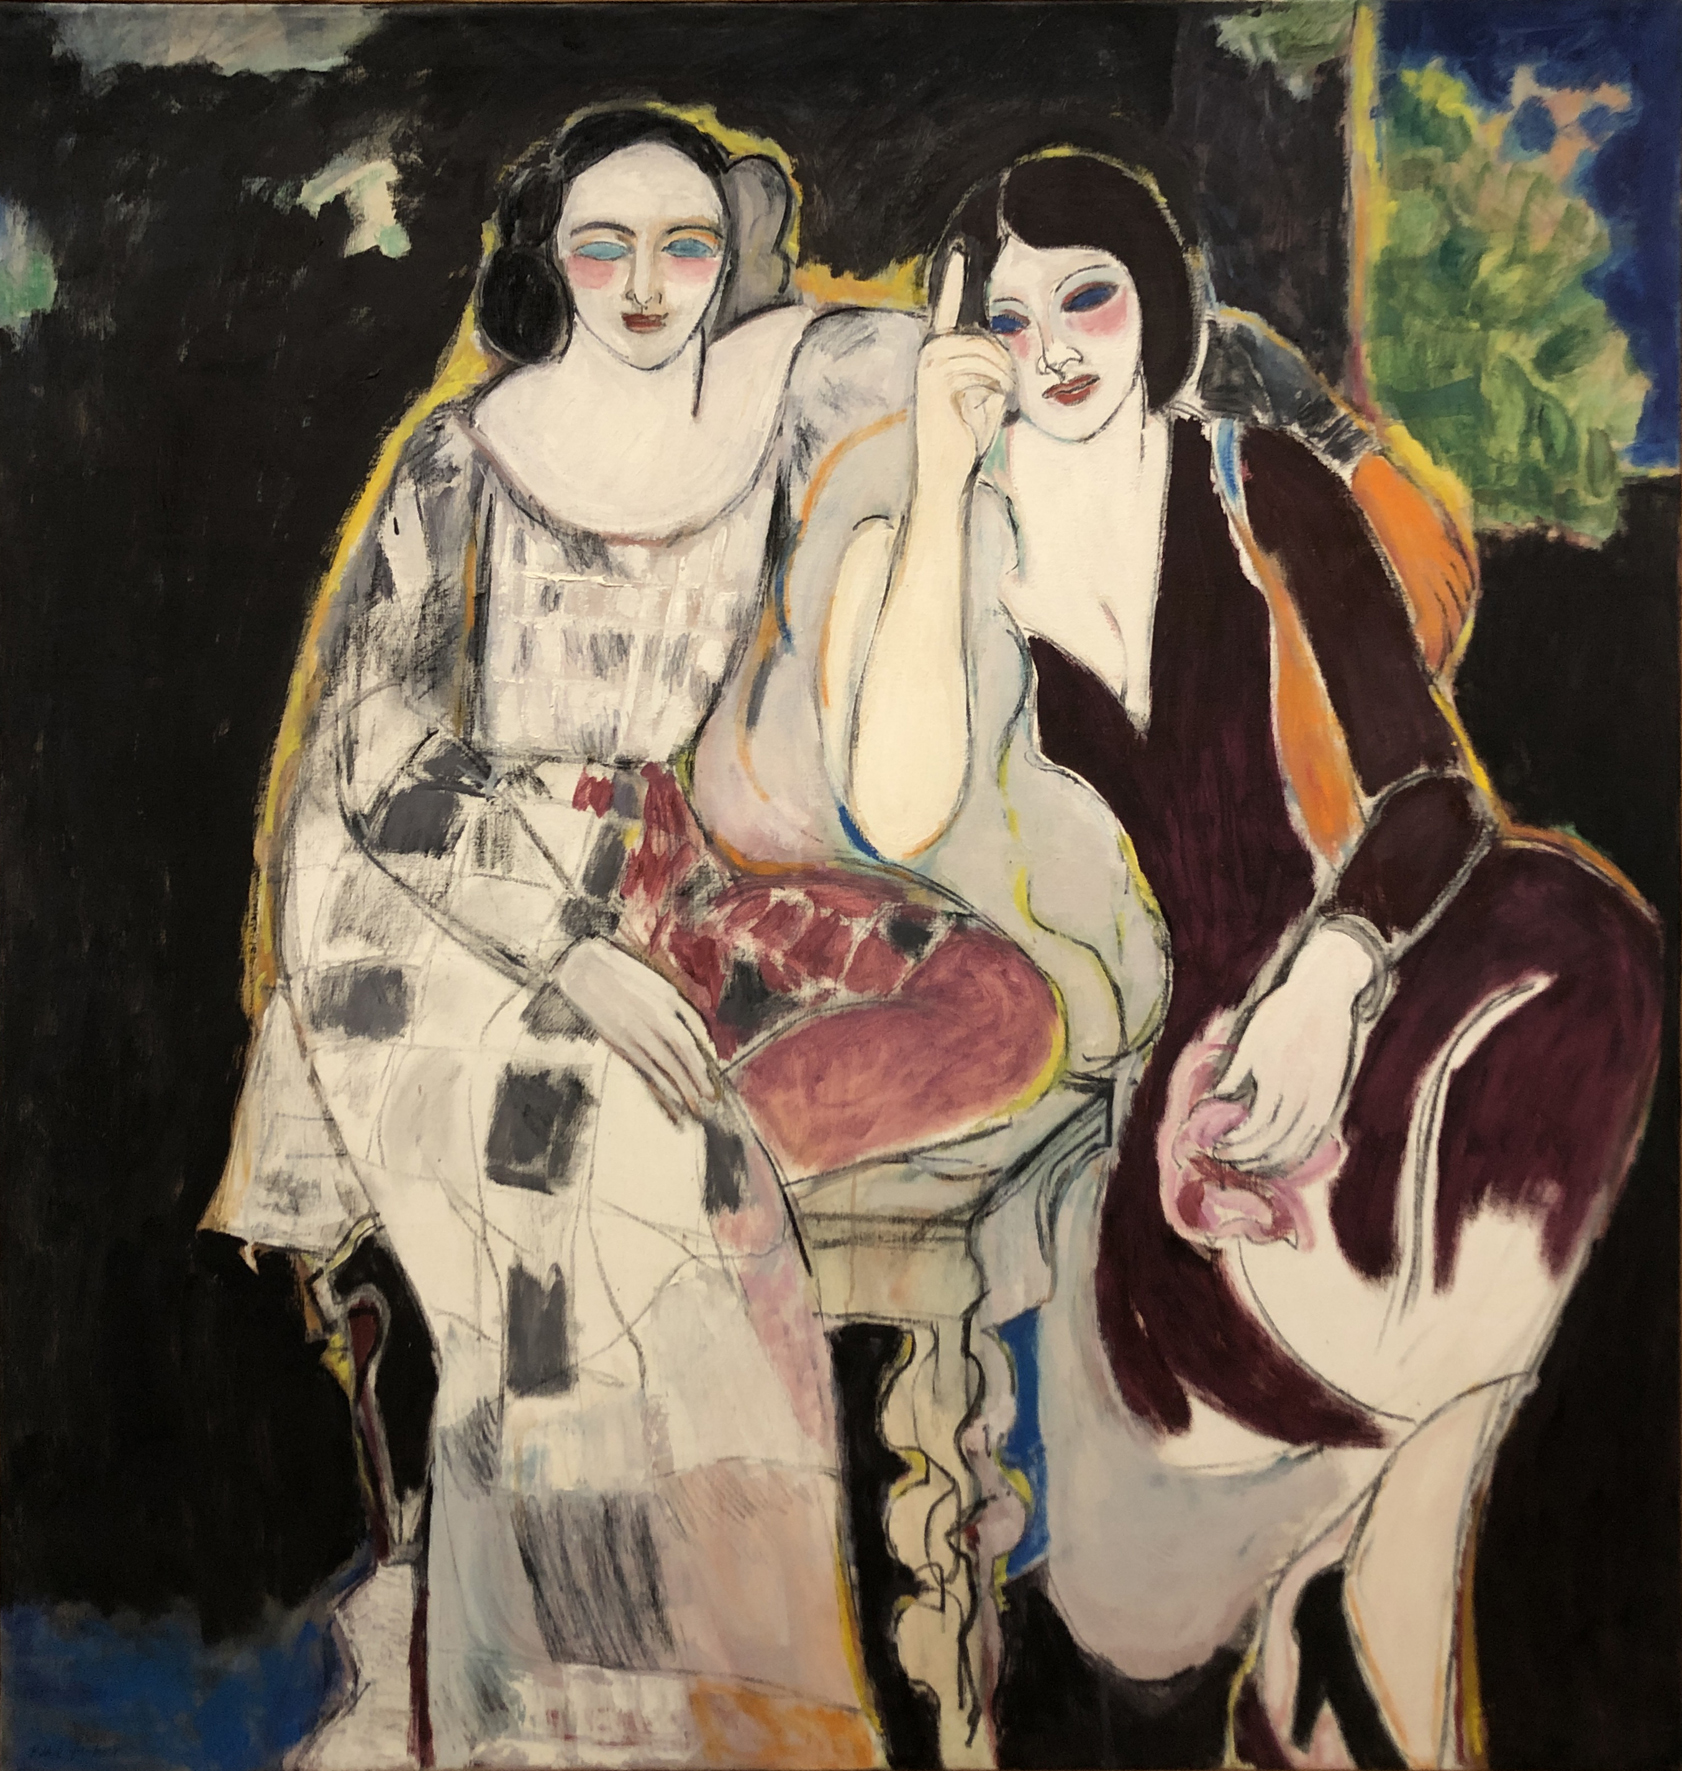 Two Sisters by Ethel Fisher, 1964, oil on linen, 44 x 42 inches, twentieth century figure painting.